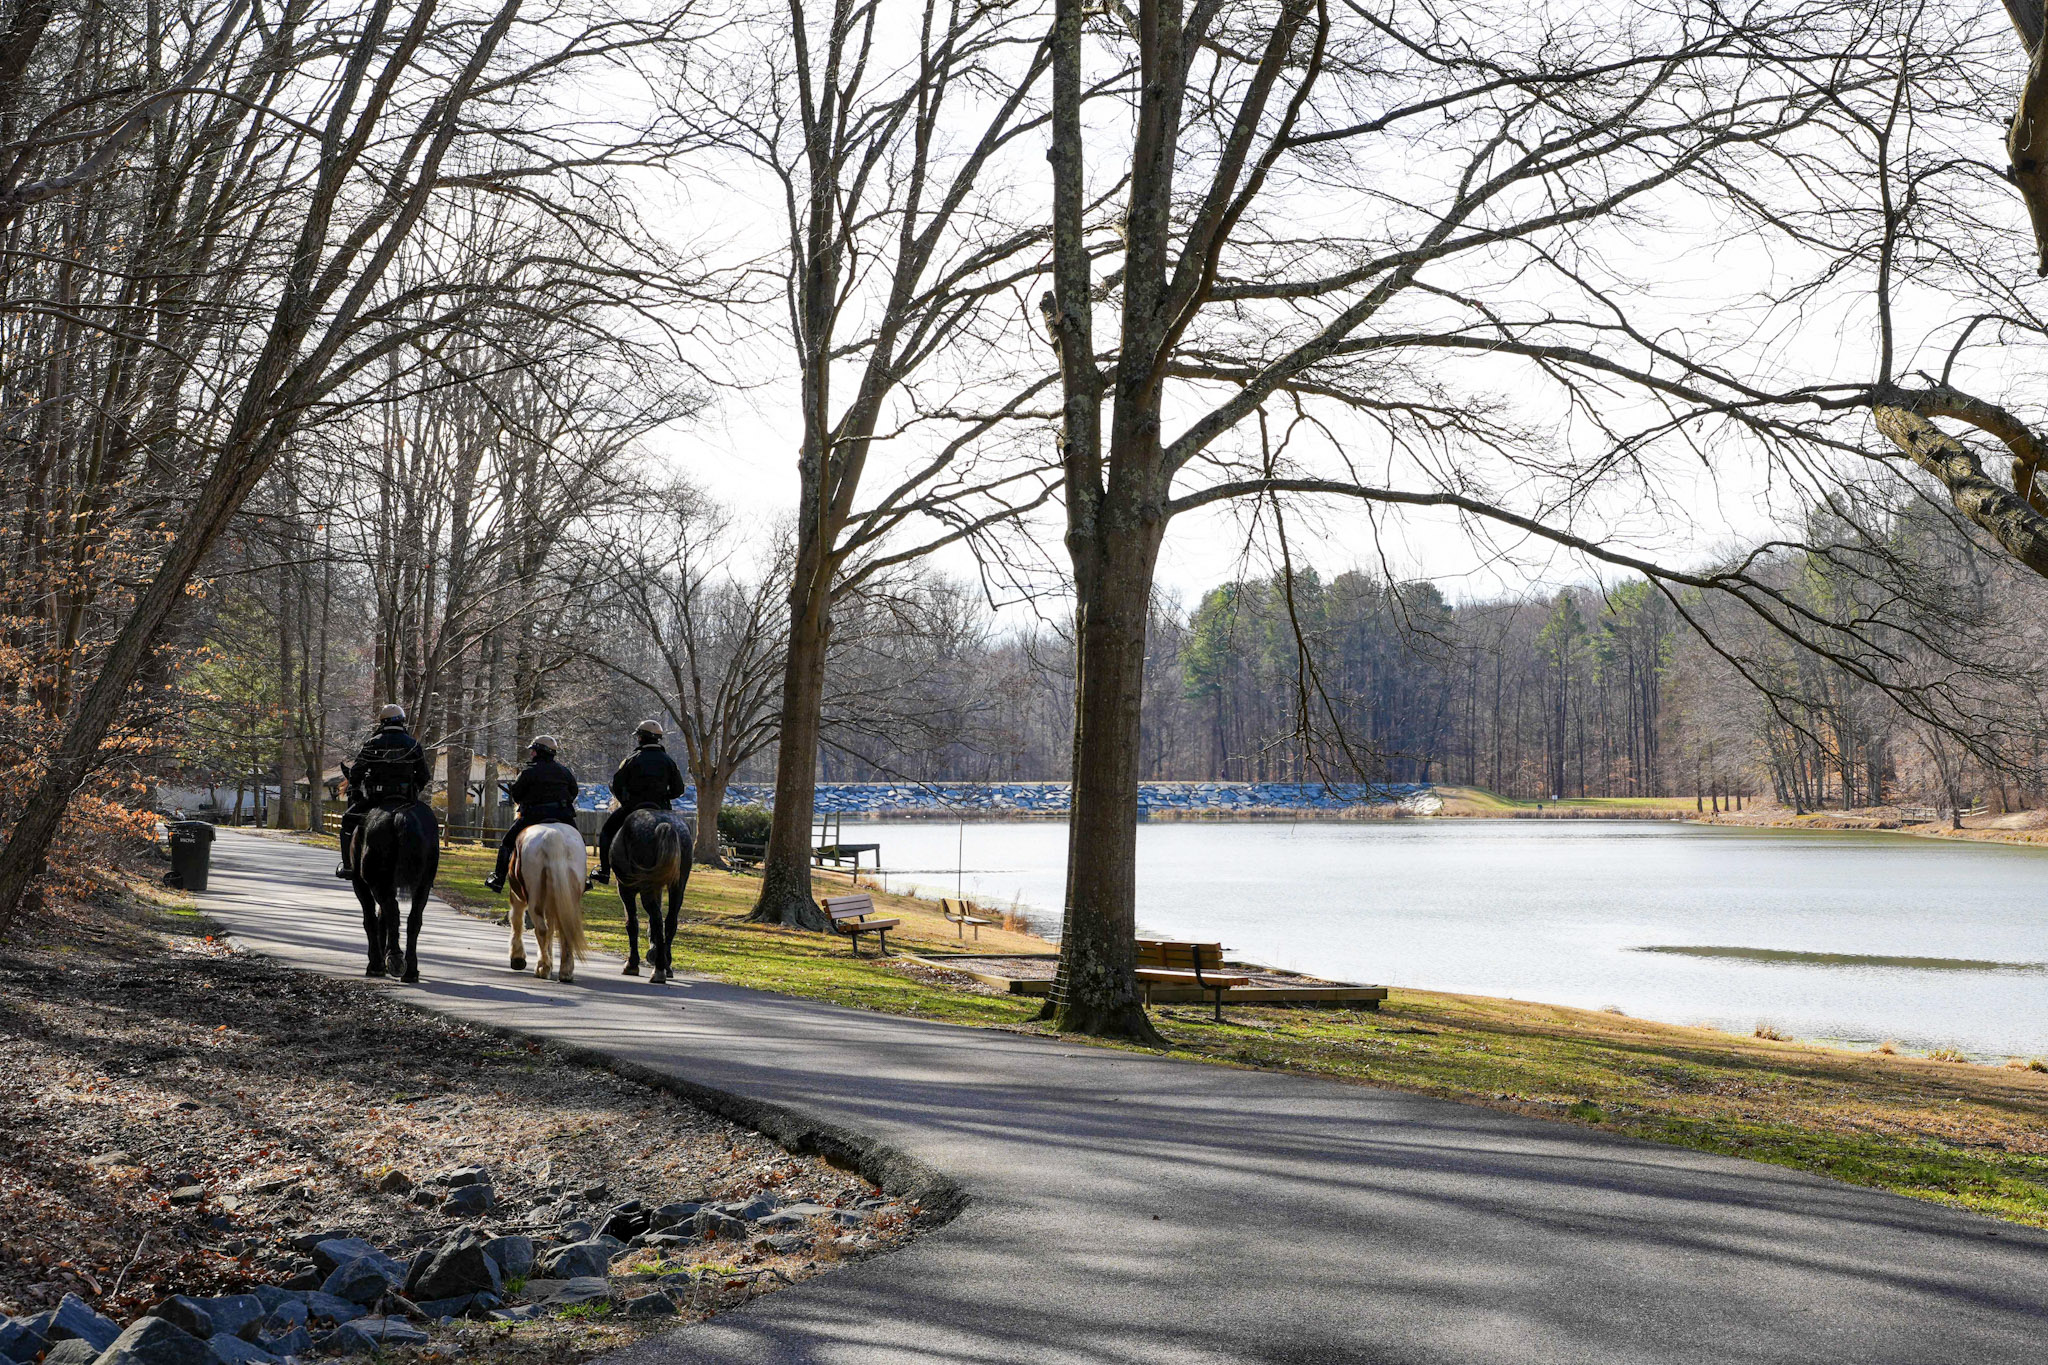 beautiful lake with trees and benches. Police on horseback ride on a paved trail.